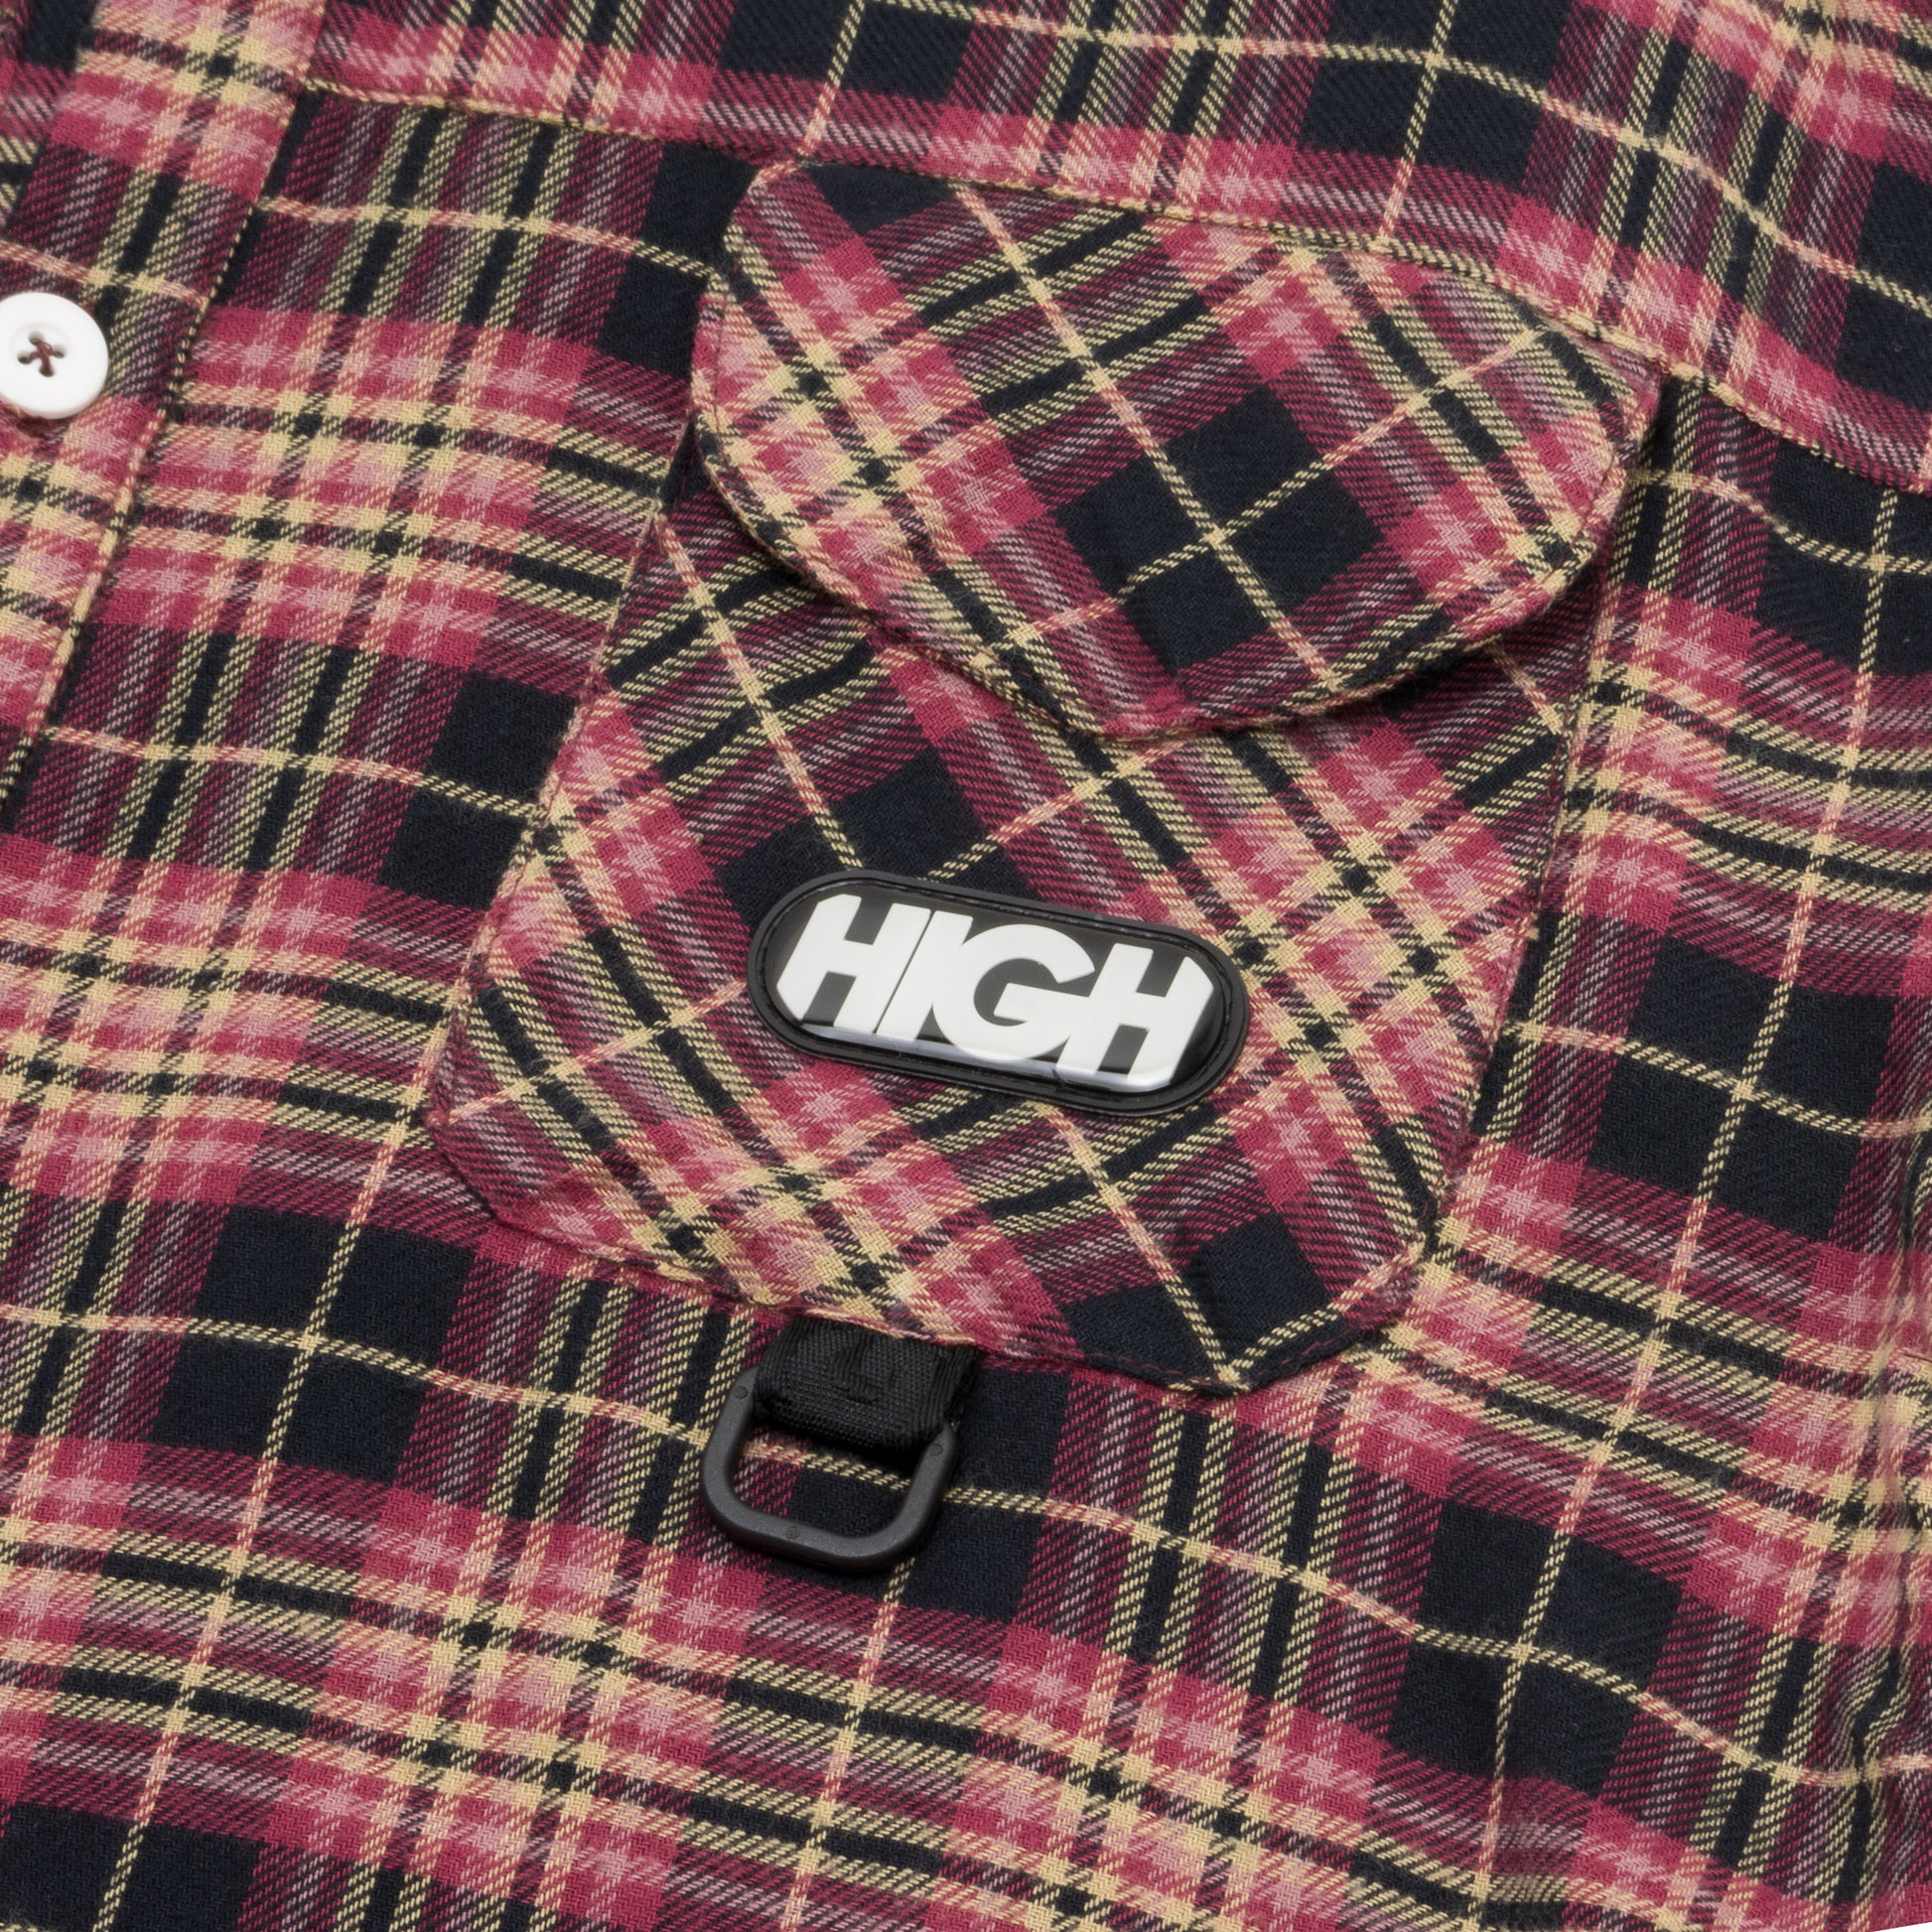 HIGH - Flannel Shirt Equipment "Red" - THE GAME